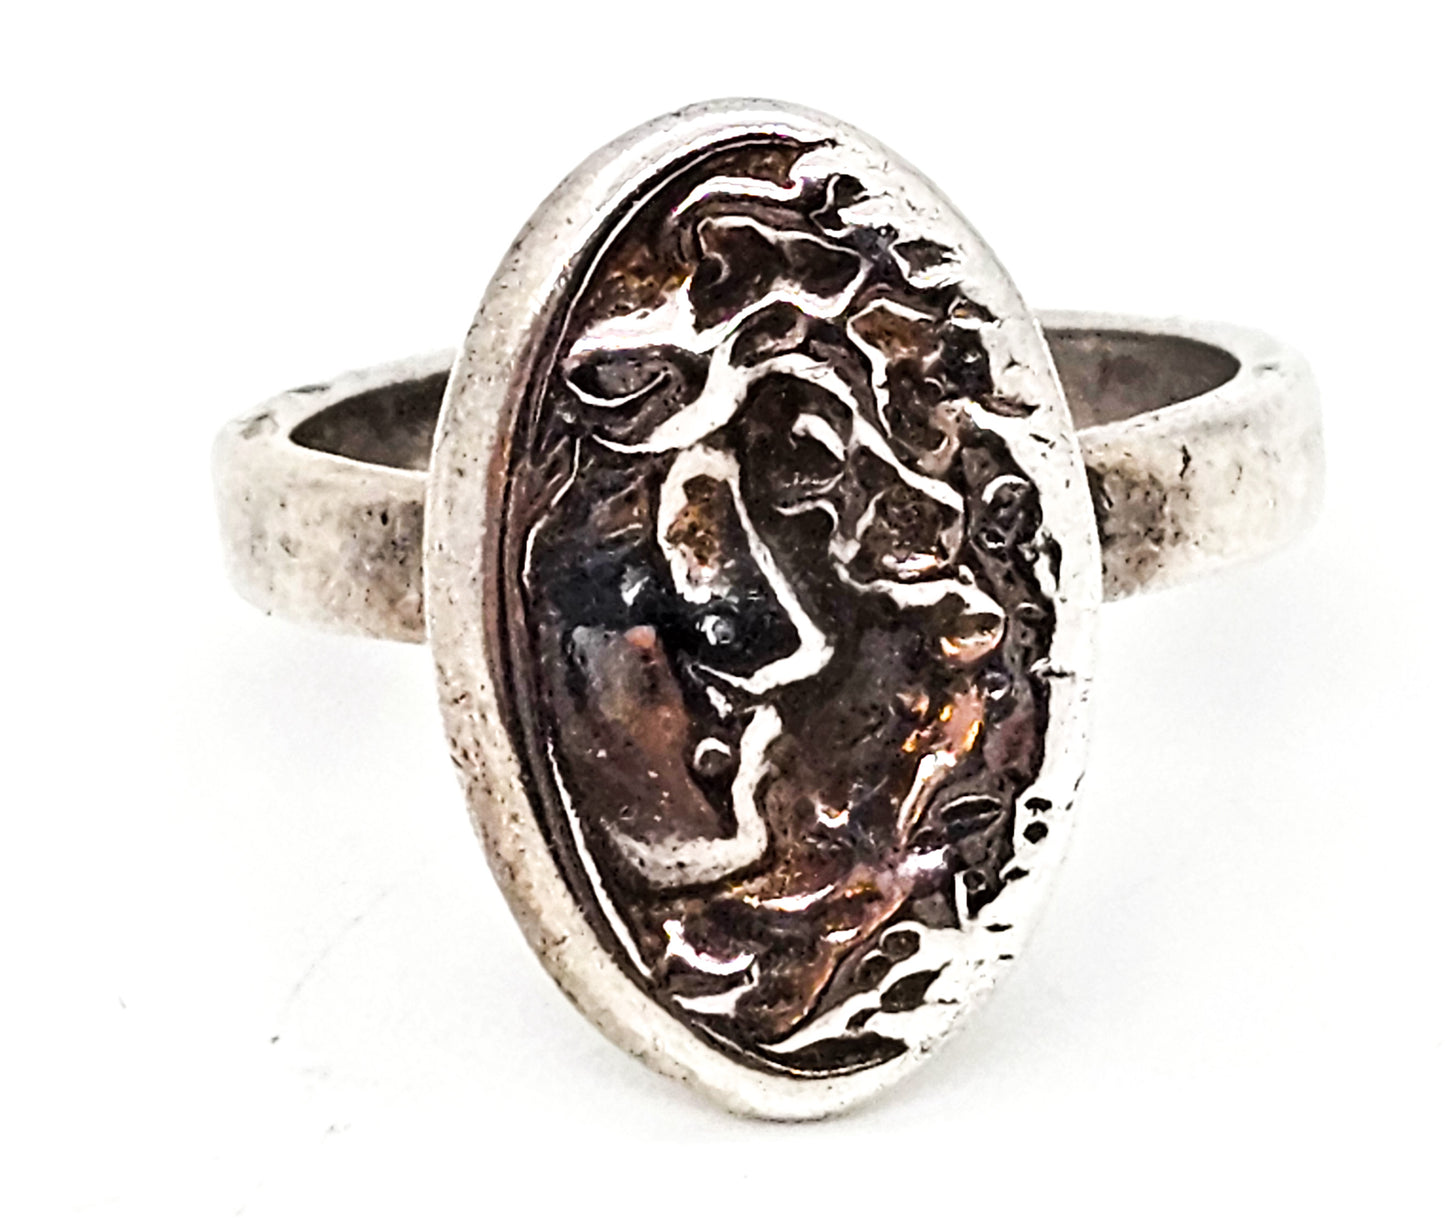 Nymph woman Art Nouveau vintage sterling silver cameo ring size 7